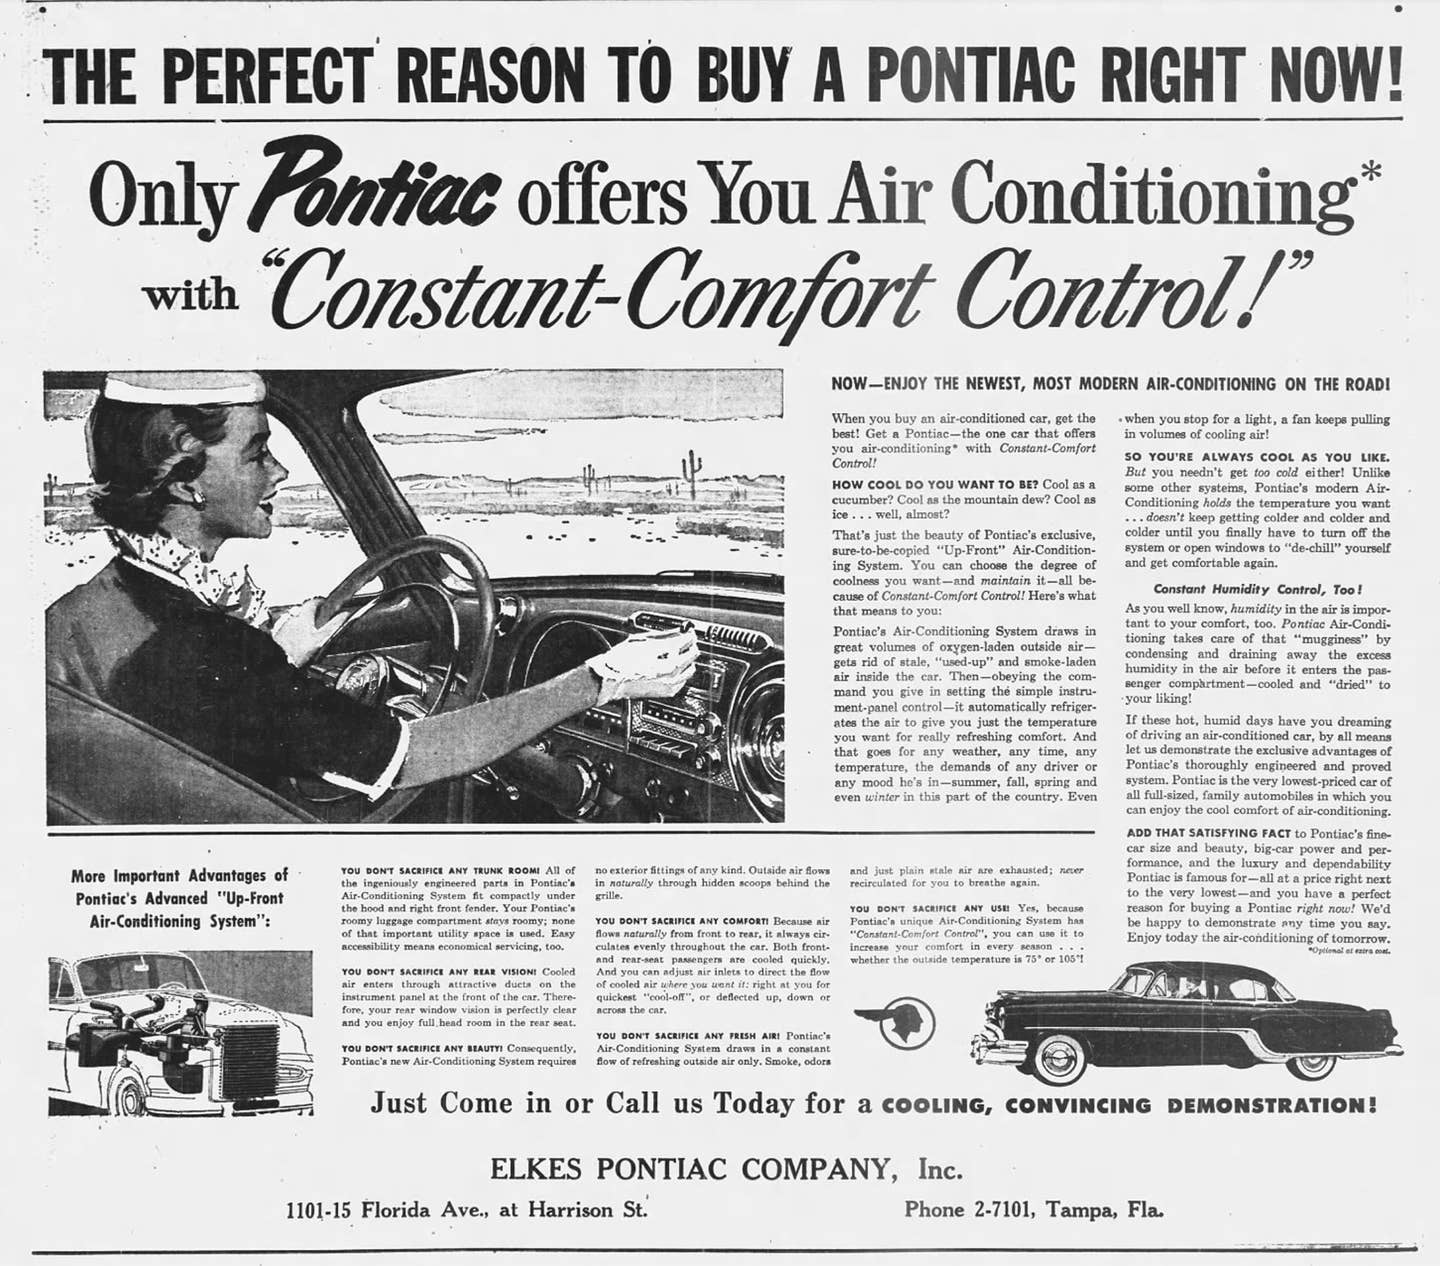 https://www.thedrive.com/uploads/2022/10/05/1954-Pontiac-air-conditioning-Ad-copy.jpg?auto=webp&optimize=high&quality=70&width=1440